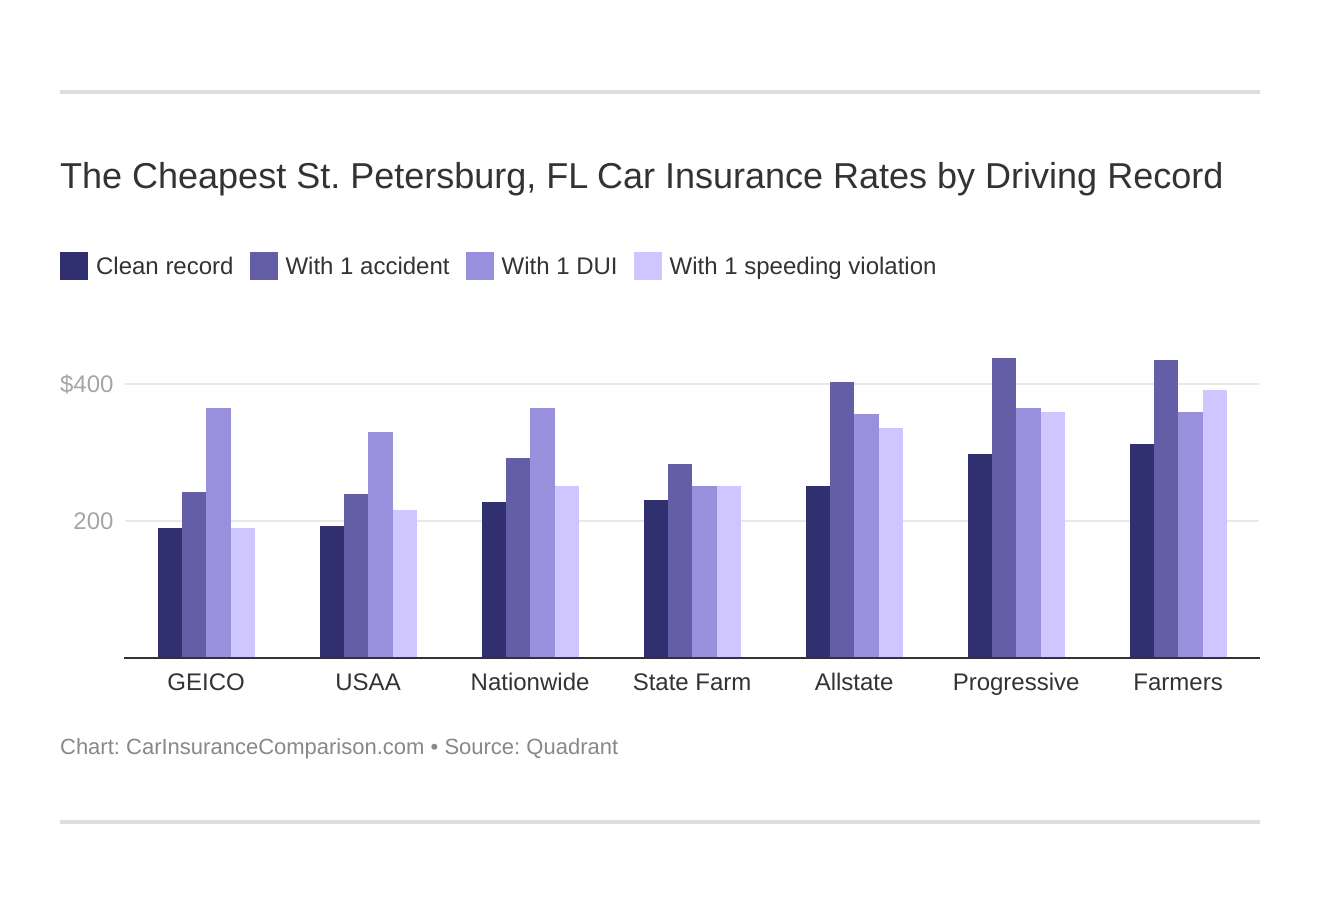 The Cheapest St. Petersburg, FL Car Insurance Rates by Driving Record